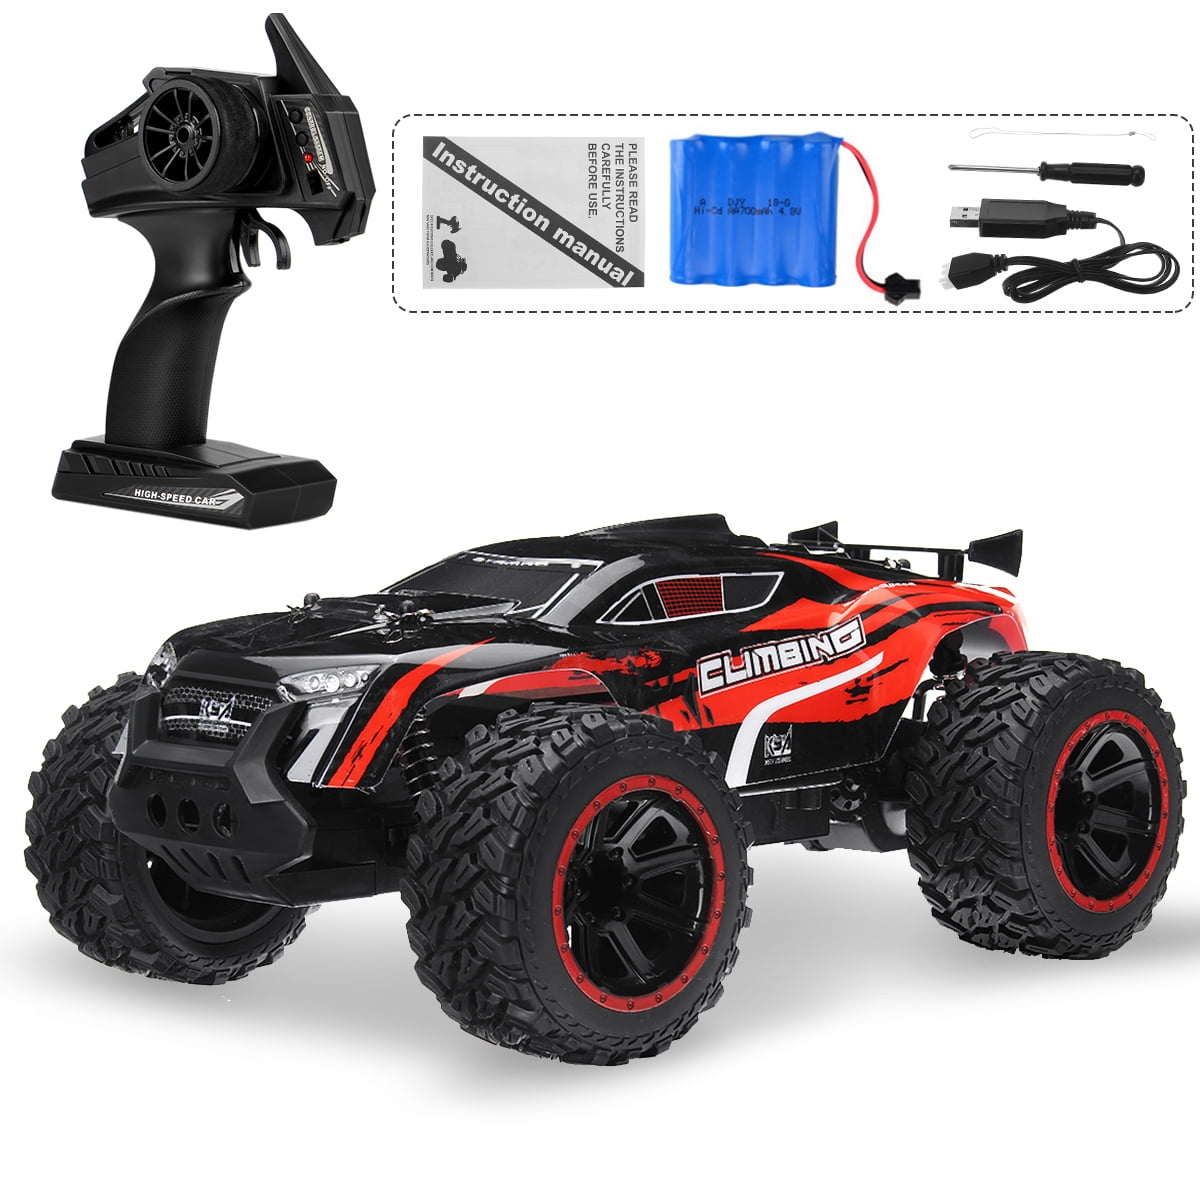 1:14 Scale RC Cars Remote Control Car Toy Off Road Monster Truck ...